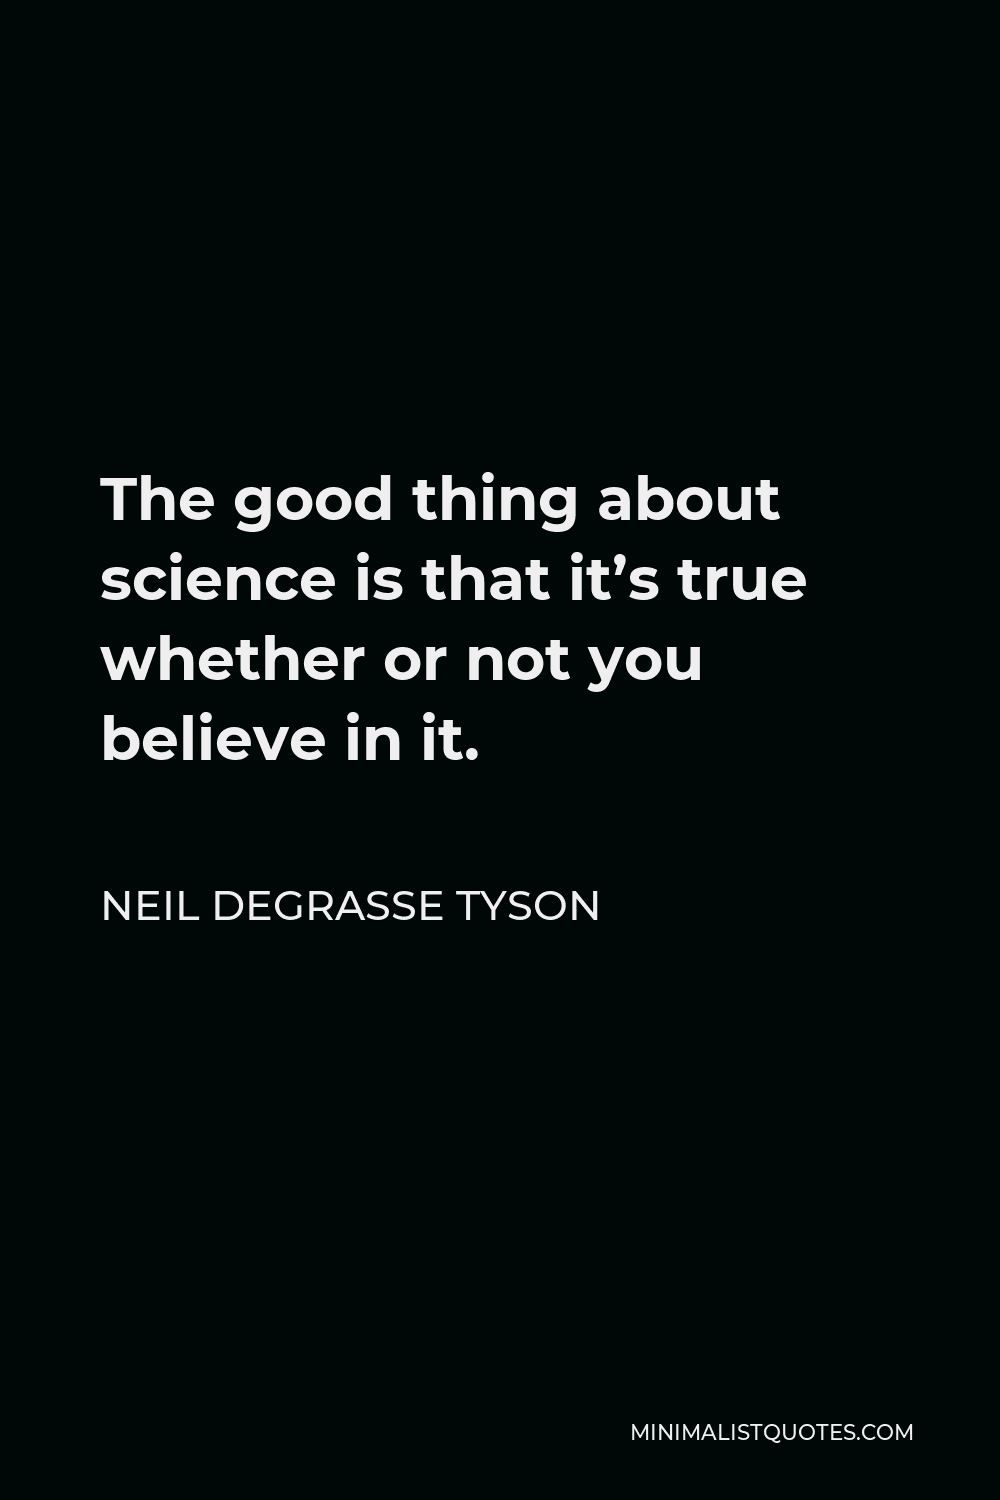 Neil deGrasse Tyson Quote - The good thing about science is that it’s true whether or not you believe in it.